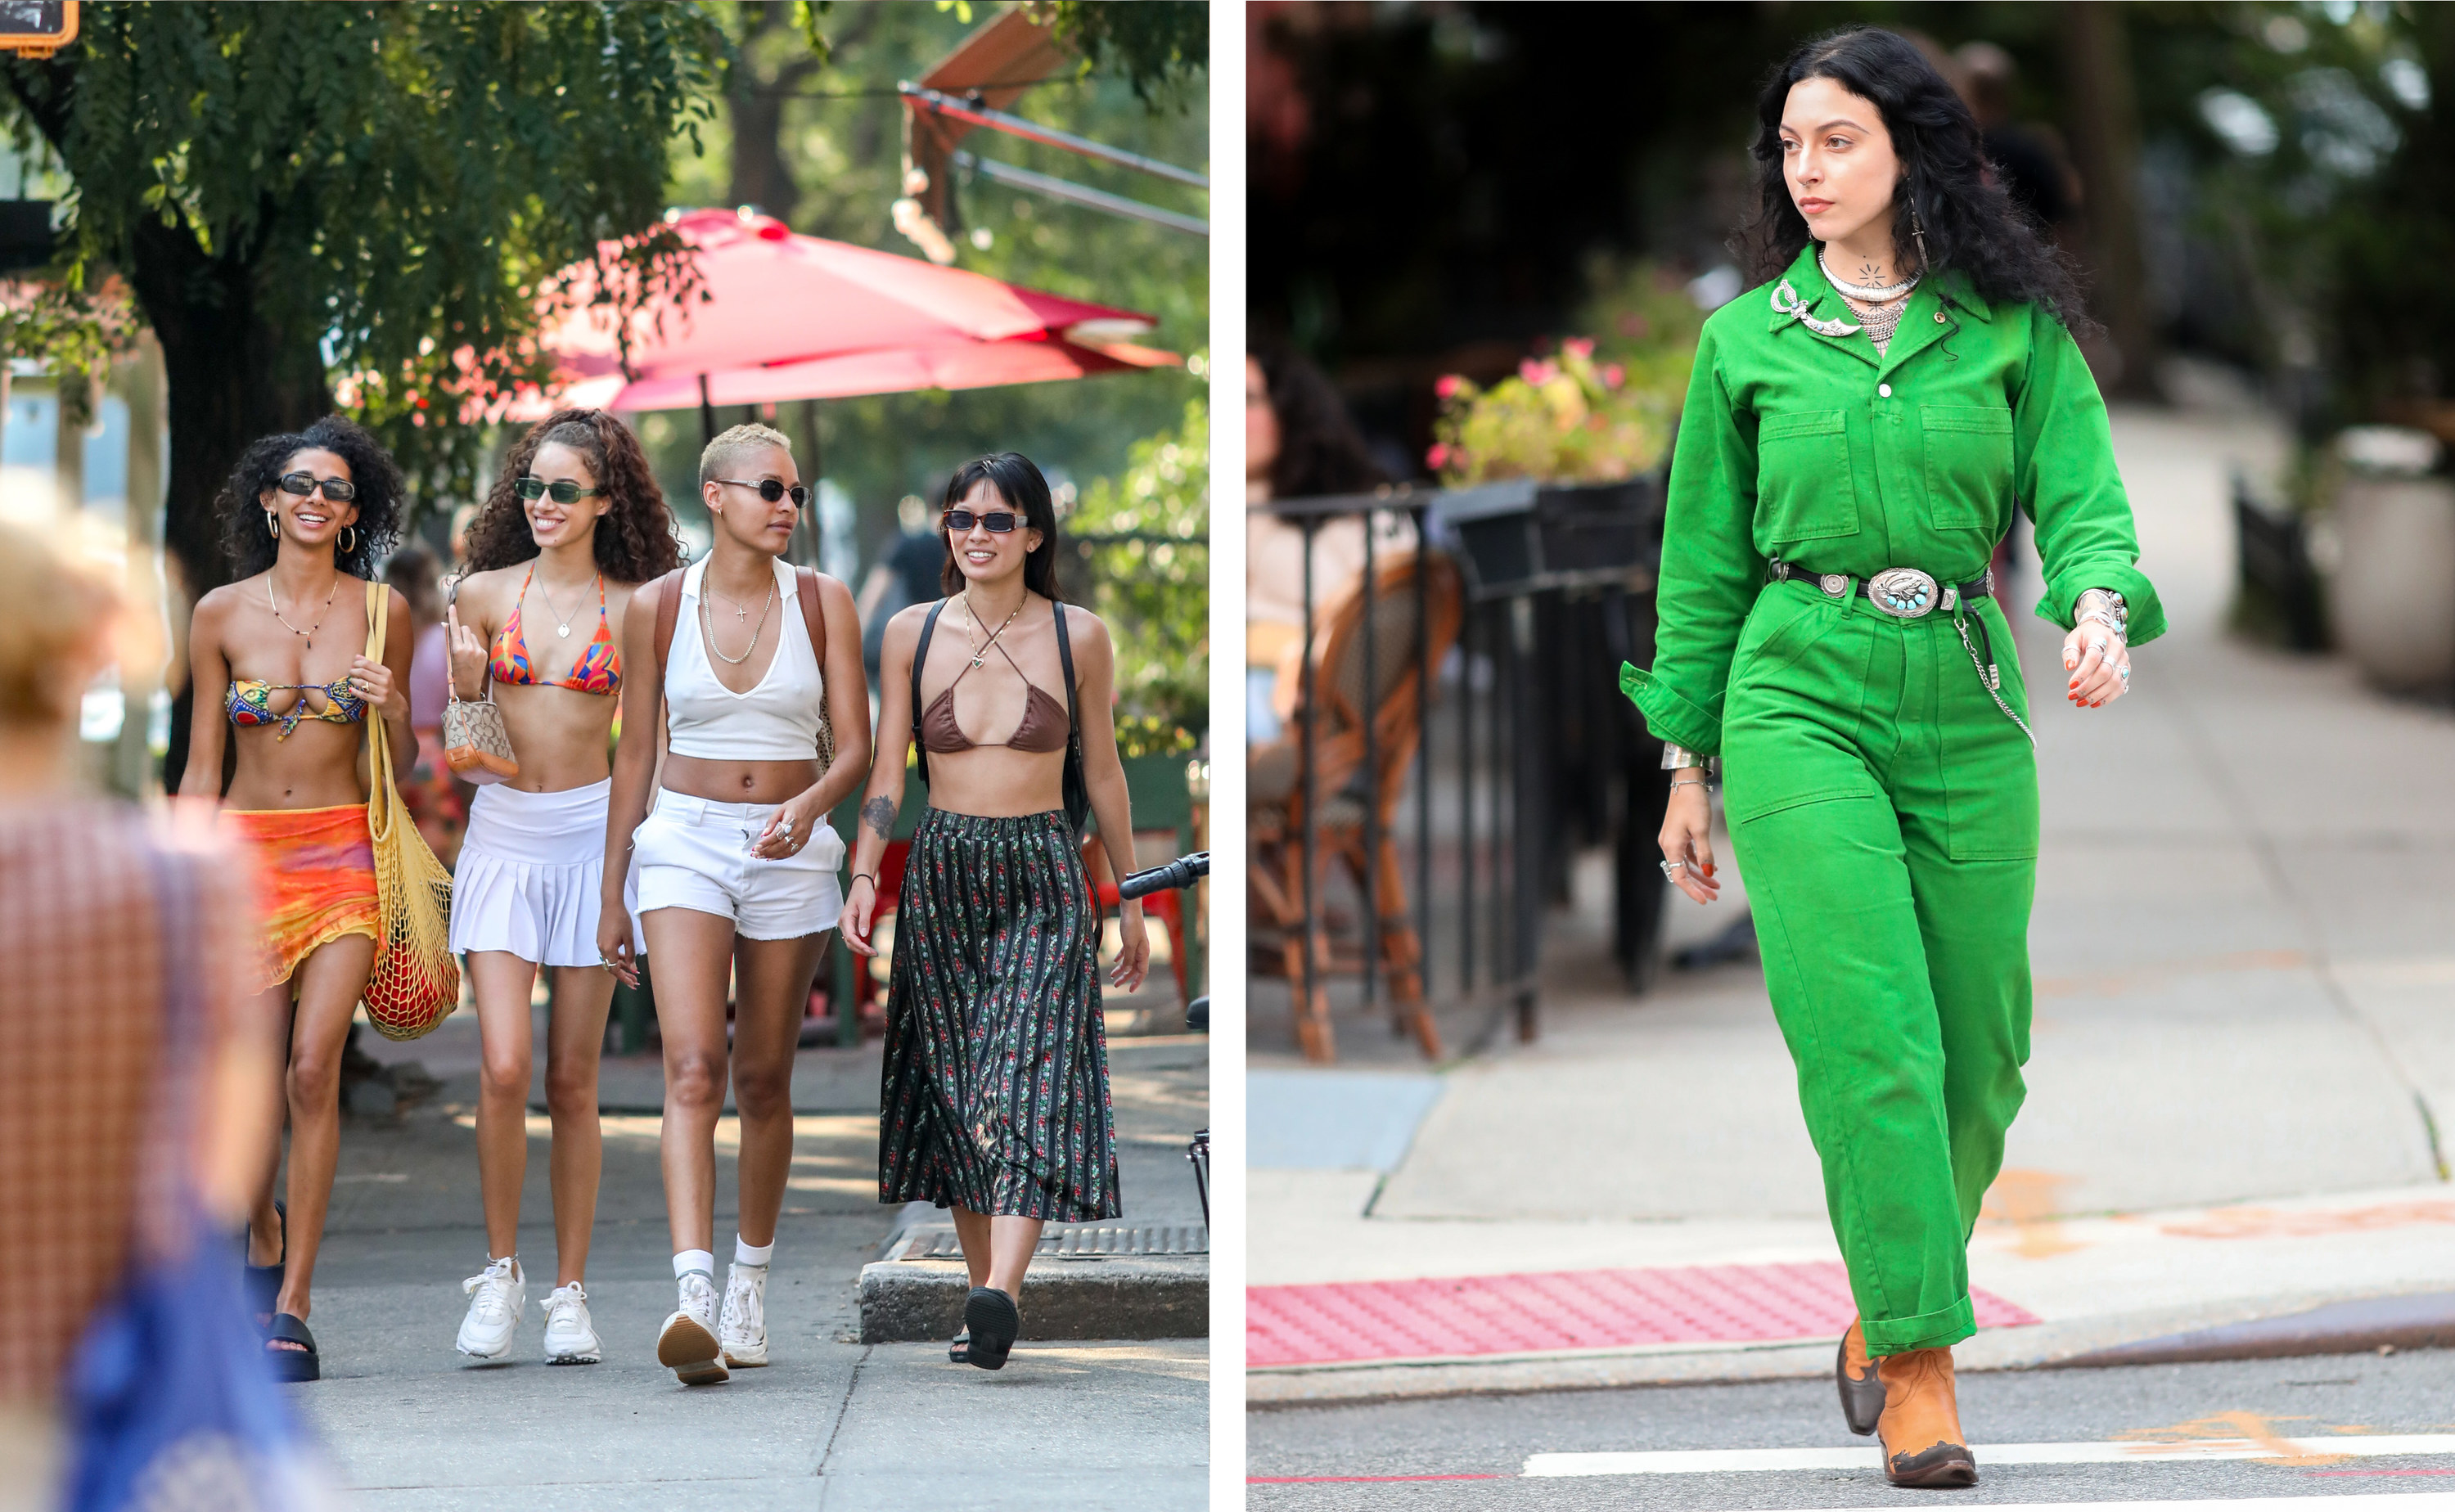 Left, a group of four women in summer clothing, right a woman crossing the street in a green jumpsuit